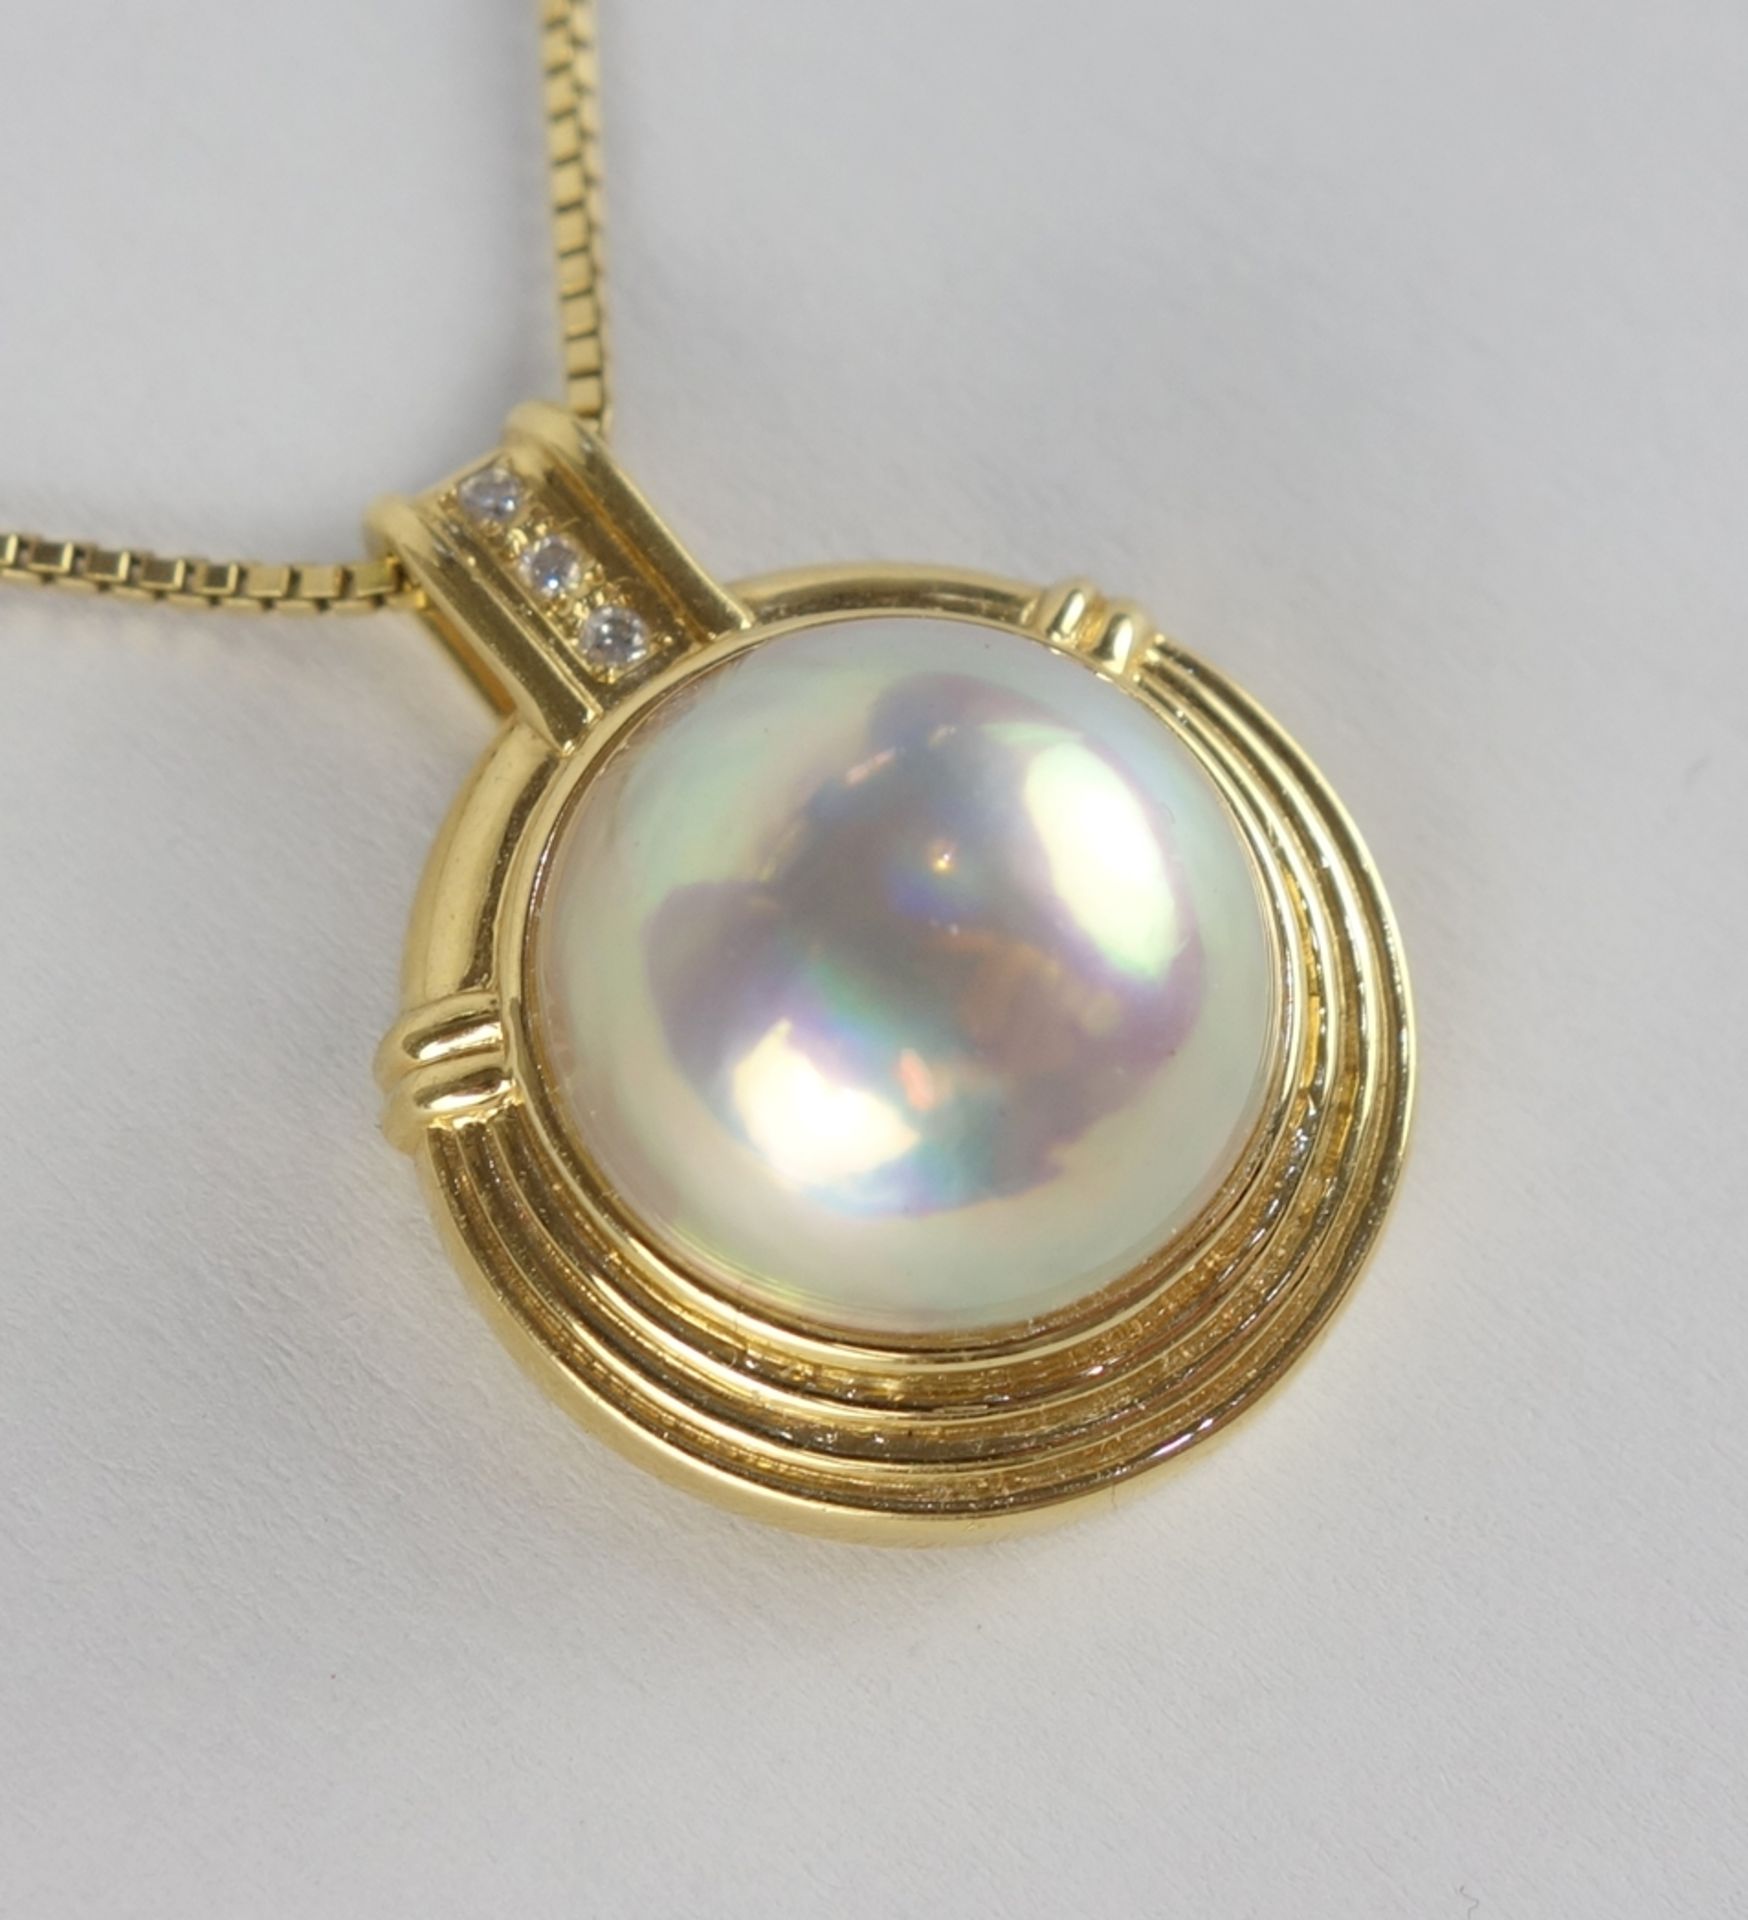 Pendant with mabé pearl and 3 diamonds on chain, 18K gold